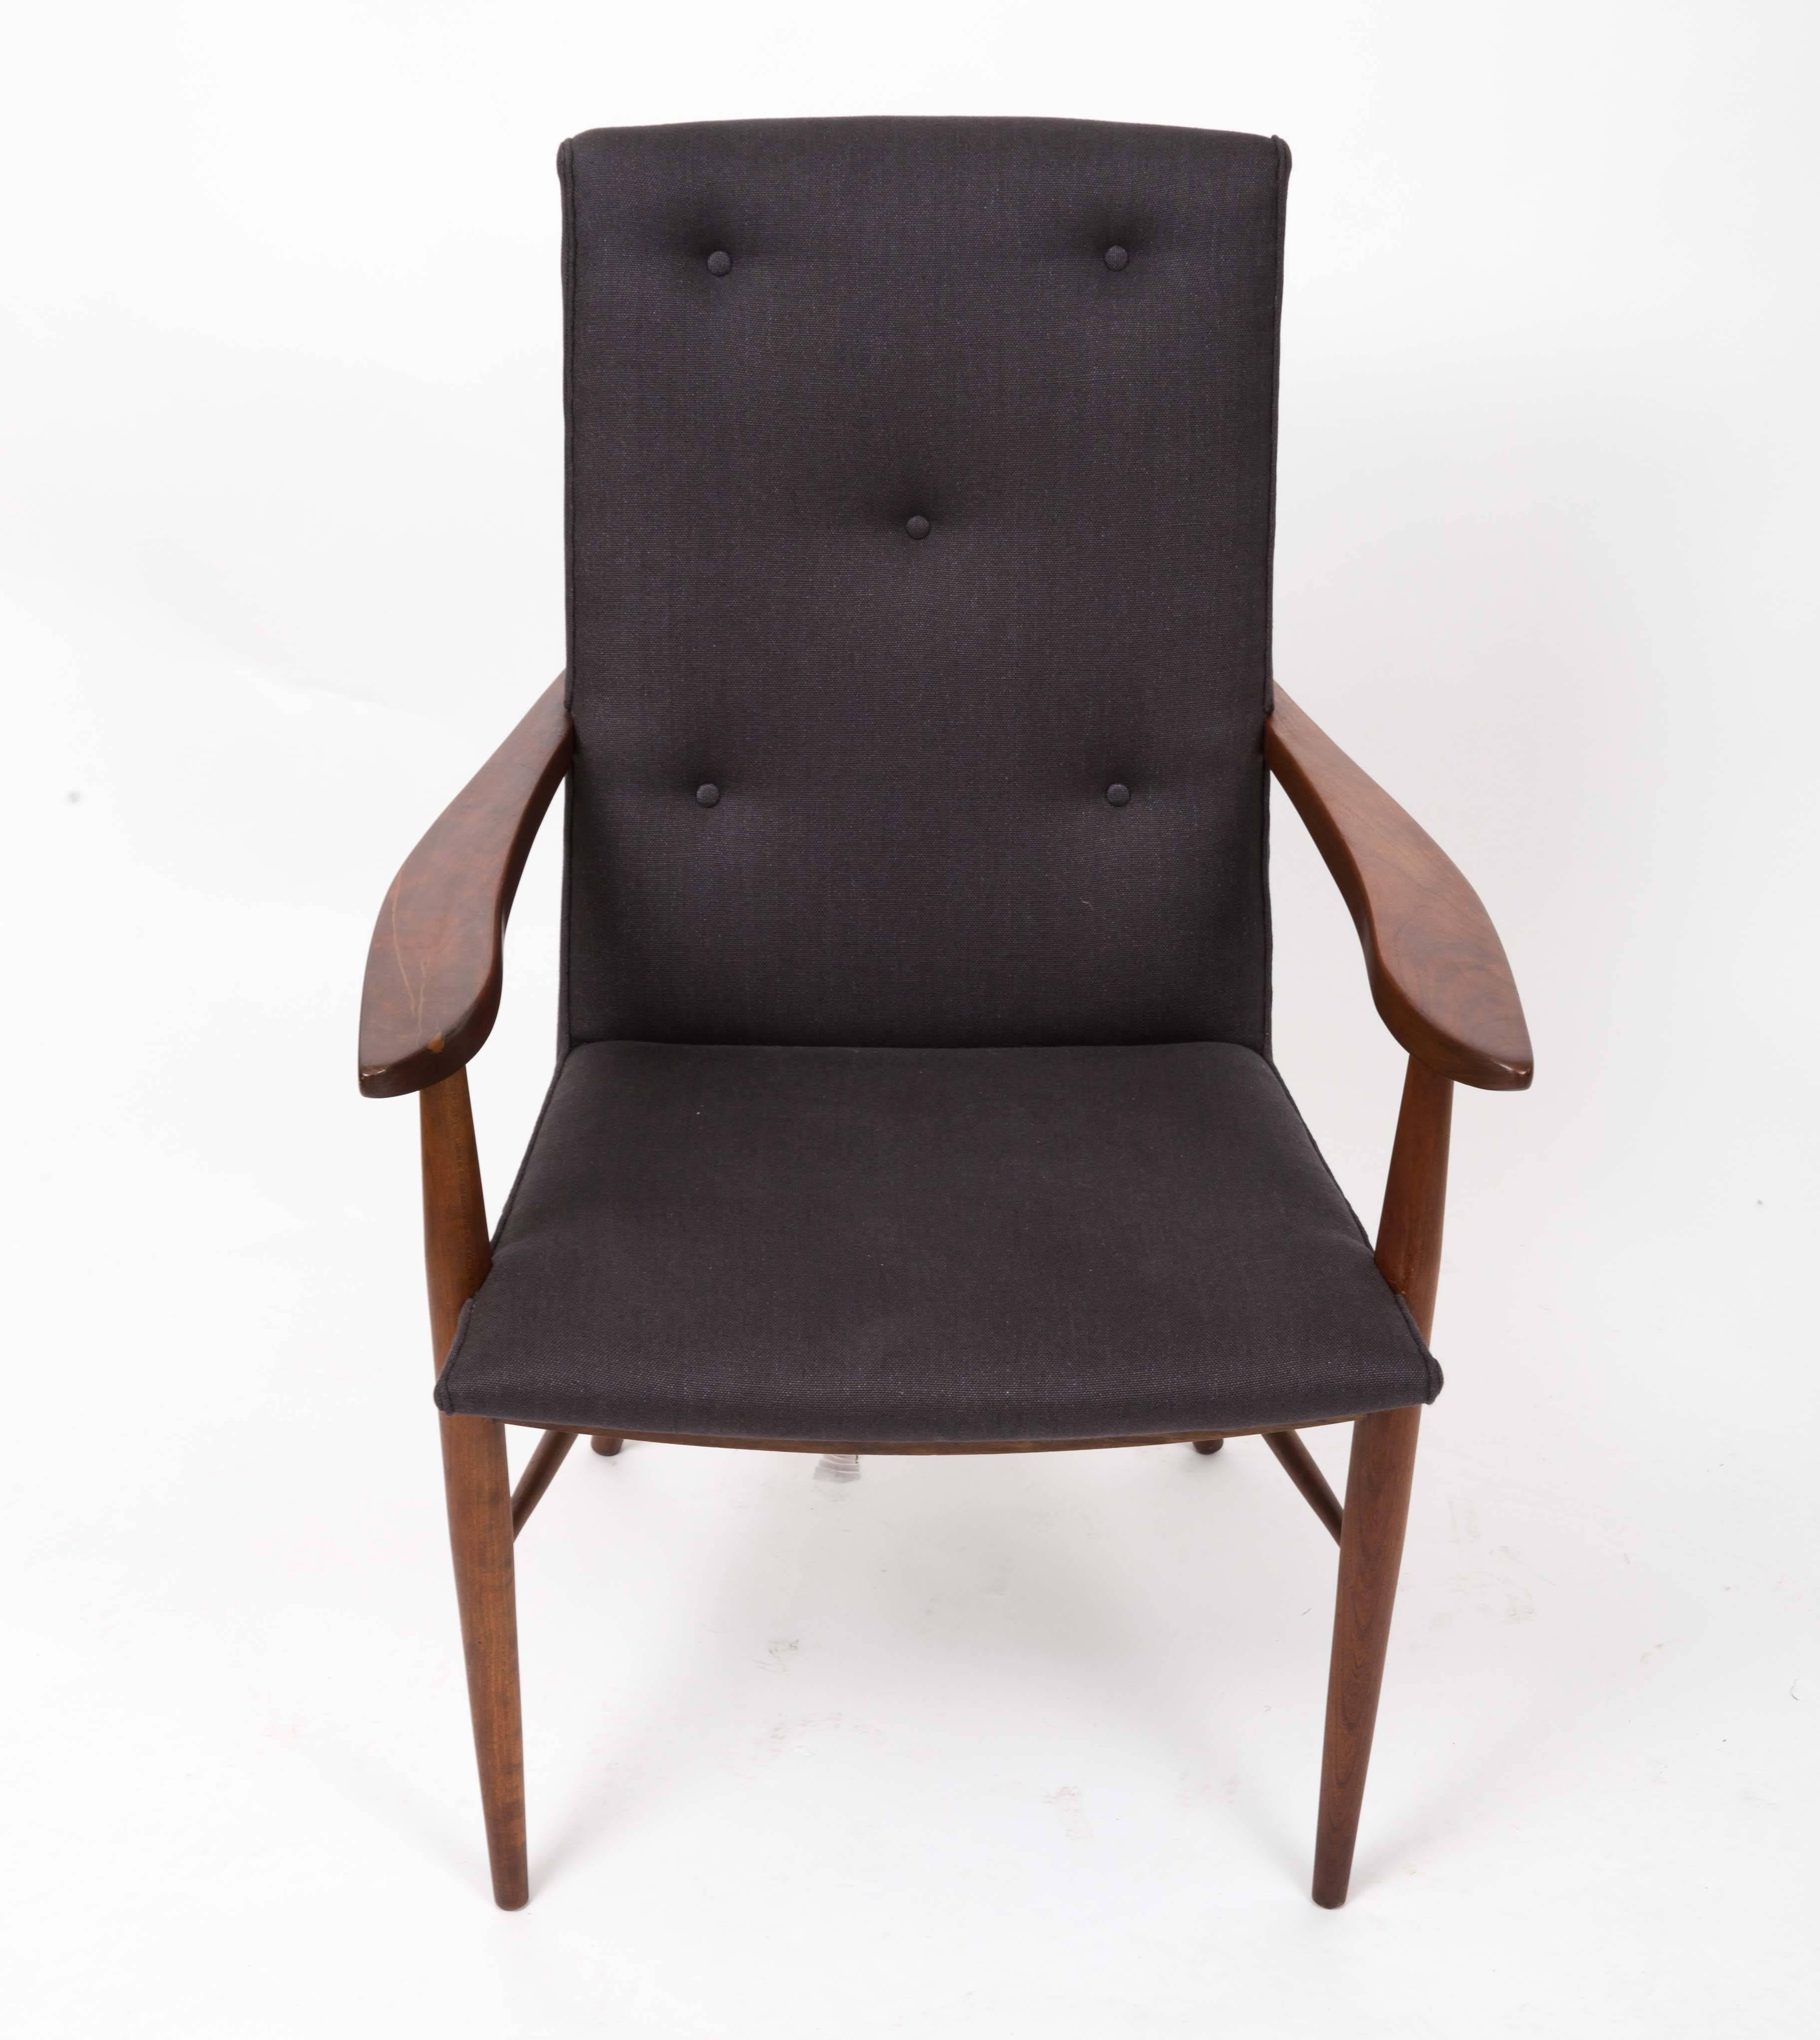 Newly upholstered George Nakashima dining chair for Widdicomb.